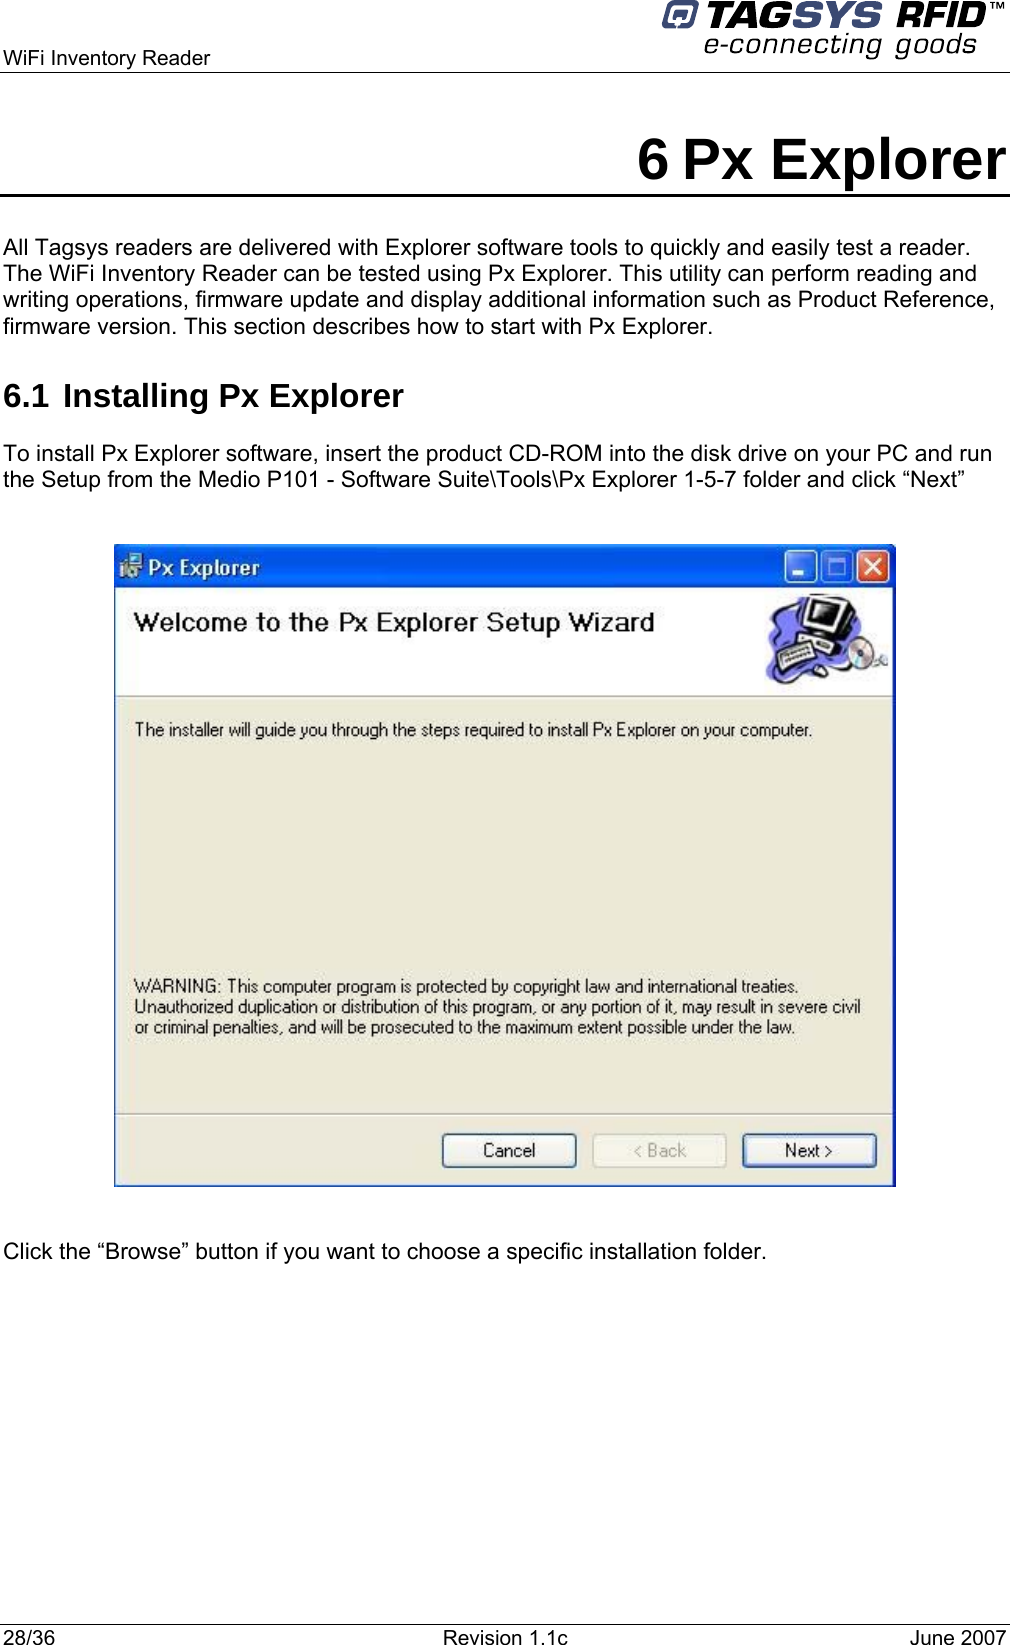  WiFi Inventory Reader     6 Px Explorer All Tagsys readers are delivered with Explorer software tools to quickly and easily test a reader. The WiFi Inventory Reader can be tested using Px Explorer. This utility can perform reading and writing operations, firmware update and display additional information such as Product Reference, firmware version. This section describes how to start with Px Explorer. 6.1 Installing Px Explorer To install Px Explorer software, insert the product CD-ROM into the disk drive on your PC and run the Setup from the Medio P101 - Software Suite\Tools\Px Explorer 1-5-7 folder and click “Next”    Click the “Browse” button if you want to choose a specific installation folder. 28/36  Revision 1.1c  June 2007  